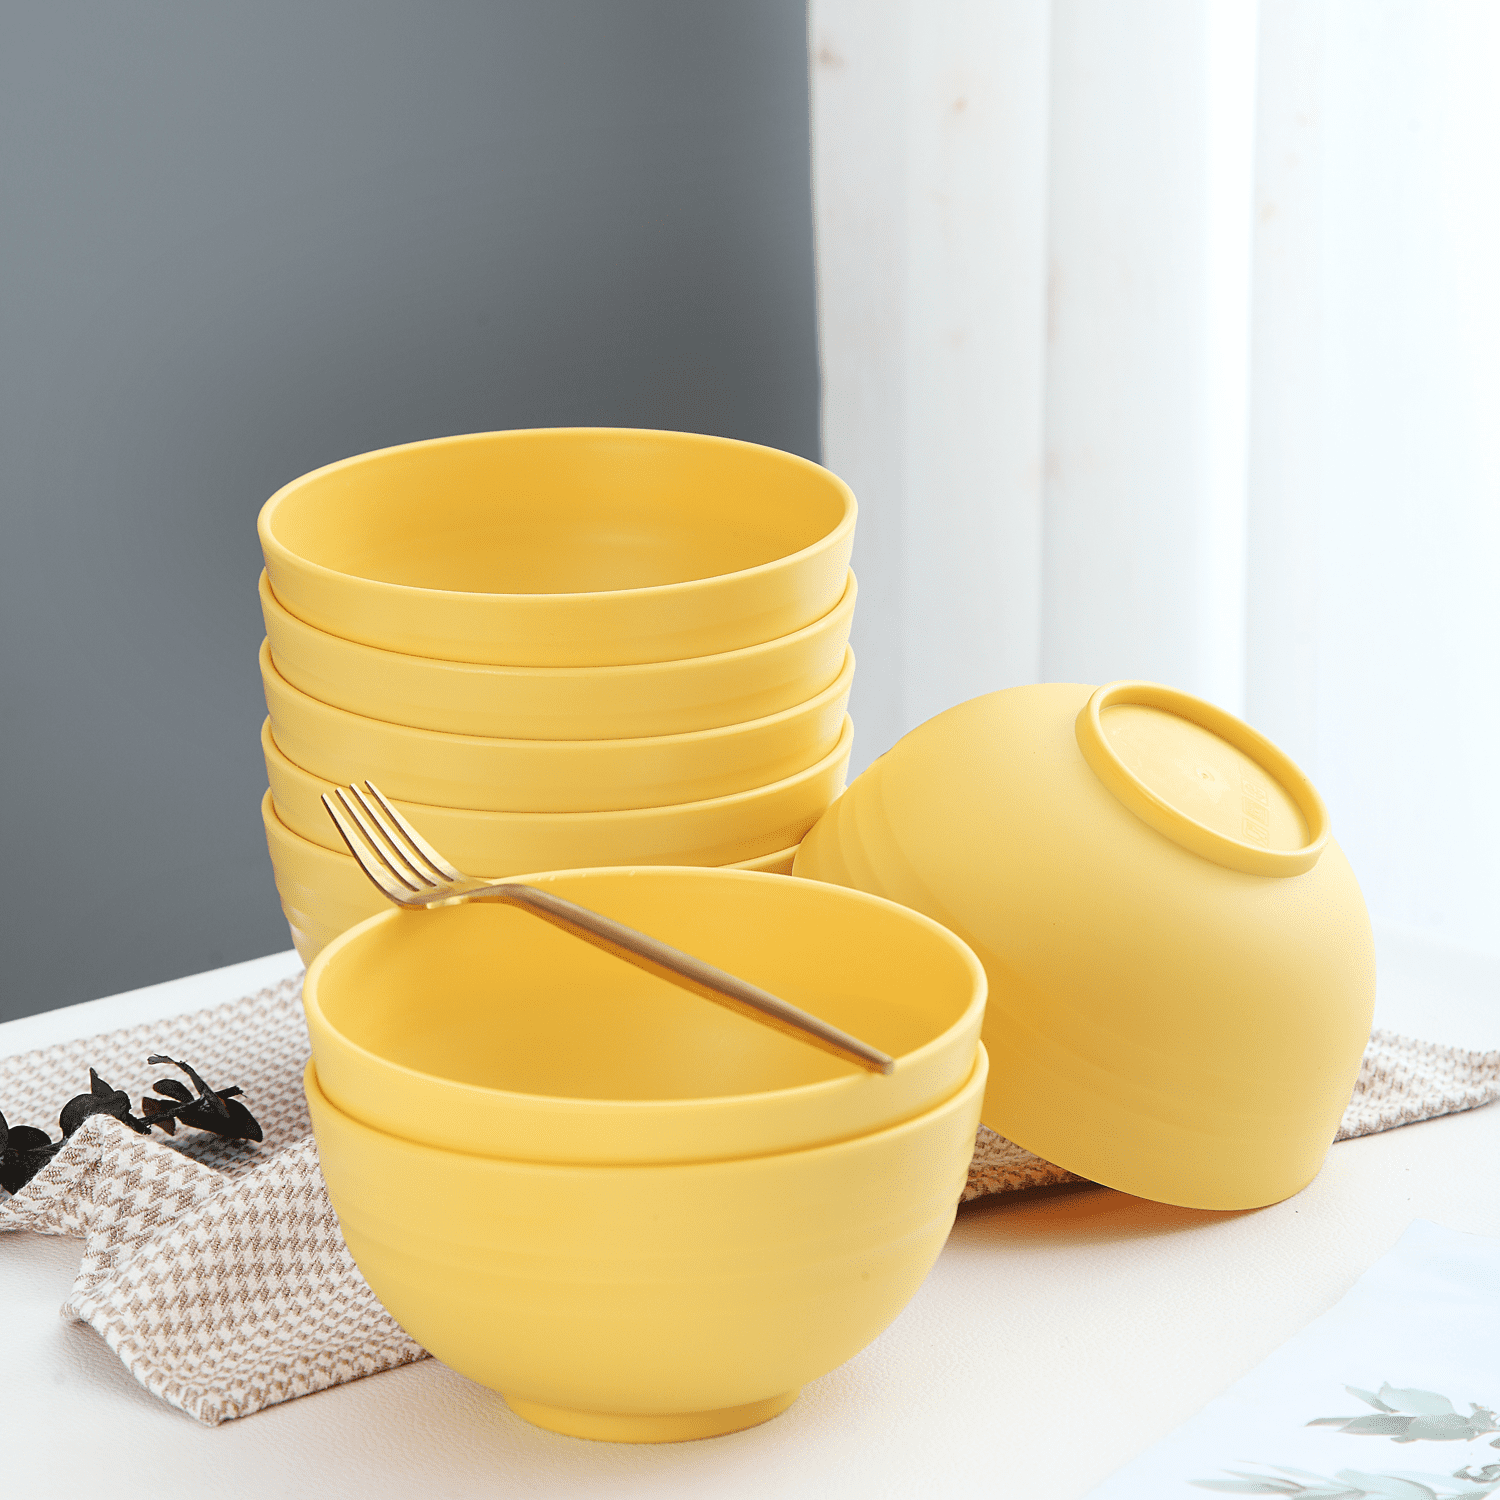 US$ 21.99 - Cereal Bowls 8 Pieces, Reusable Light Weight Bowl For